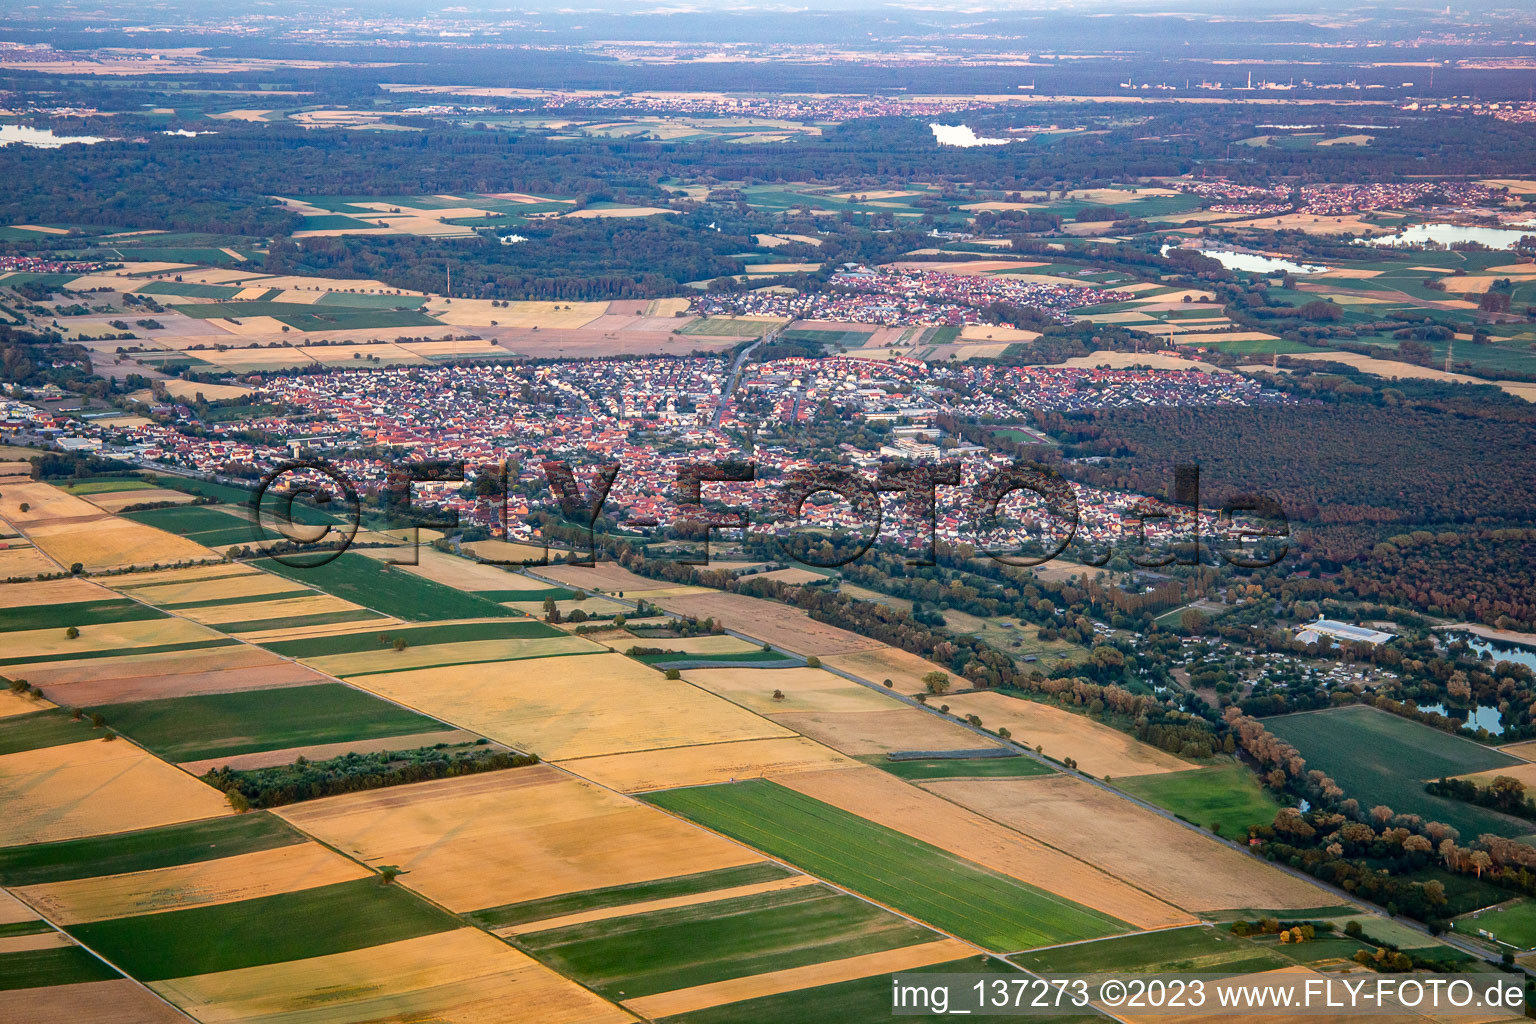 Aerial view of From northwest in Rülzheim in the state Rhineland-Palatinate, Germany